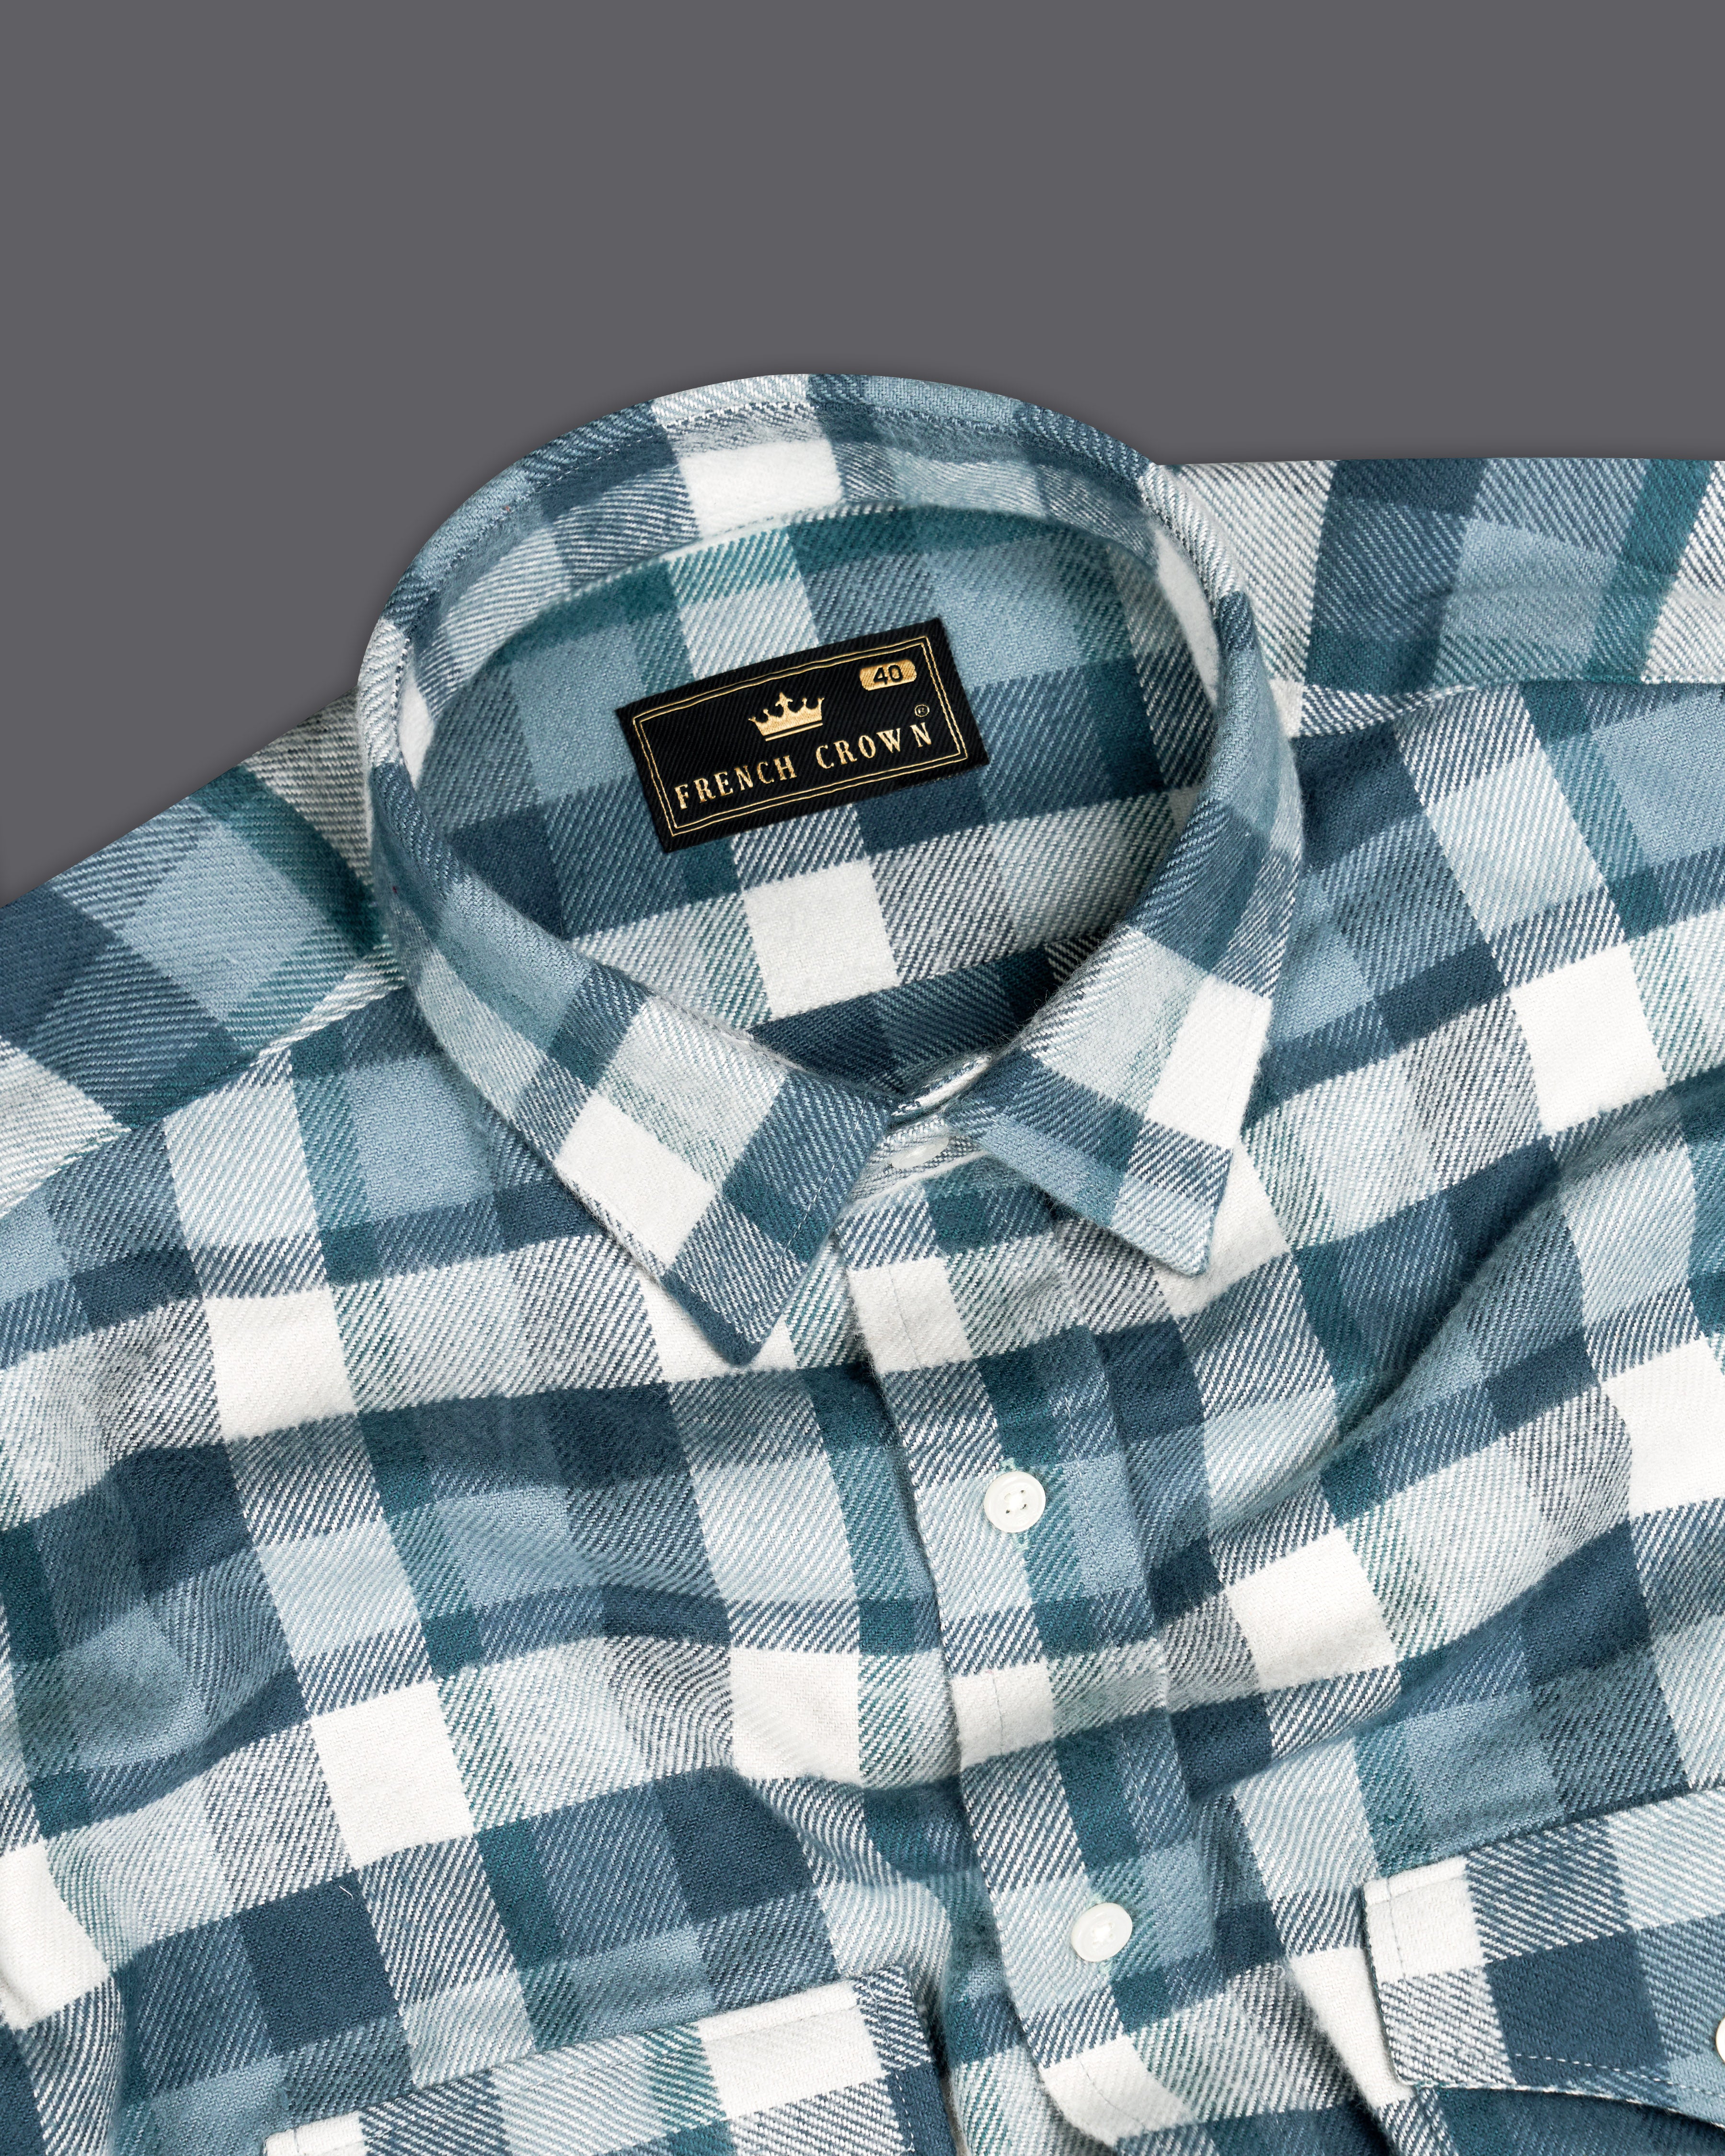 Glacier Blue with White Plaid Flannel Overshirt With Brown Elbow Patch Work 9459-OS-FP-P131-38, 9459-OS-FP-P131-H-38, 9459-OS-FP-P131-39, 9459-OS-FP-P131-H-39, 9459-OS-FP-P131-40, 9459-OS-FP-P131-H-40, 9459-OS-FP-P131-42, 9459-OS-FP-P131-H-42, 9459-OS-FP-P131-44, 9459-OS-FP-P131-H-44, 9459-OS-FP-P131-46, 9459-OS-FP-P131-H-46, 9459-OS-FP-P131-48, 9459-OS-FP-P131-H-48, 9459-OS-FP-P131-50, 9459-OS-FP-P131-H-50, 9459-OS-FP-P131-52, 9459-OS-FP-P131-H-52